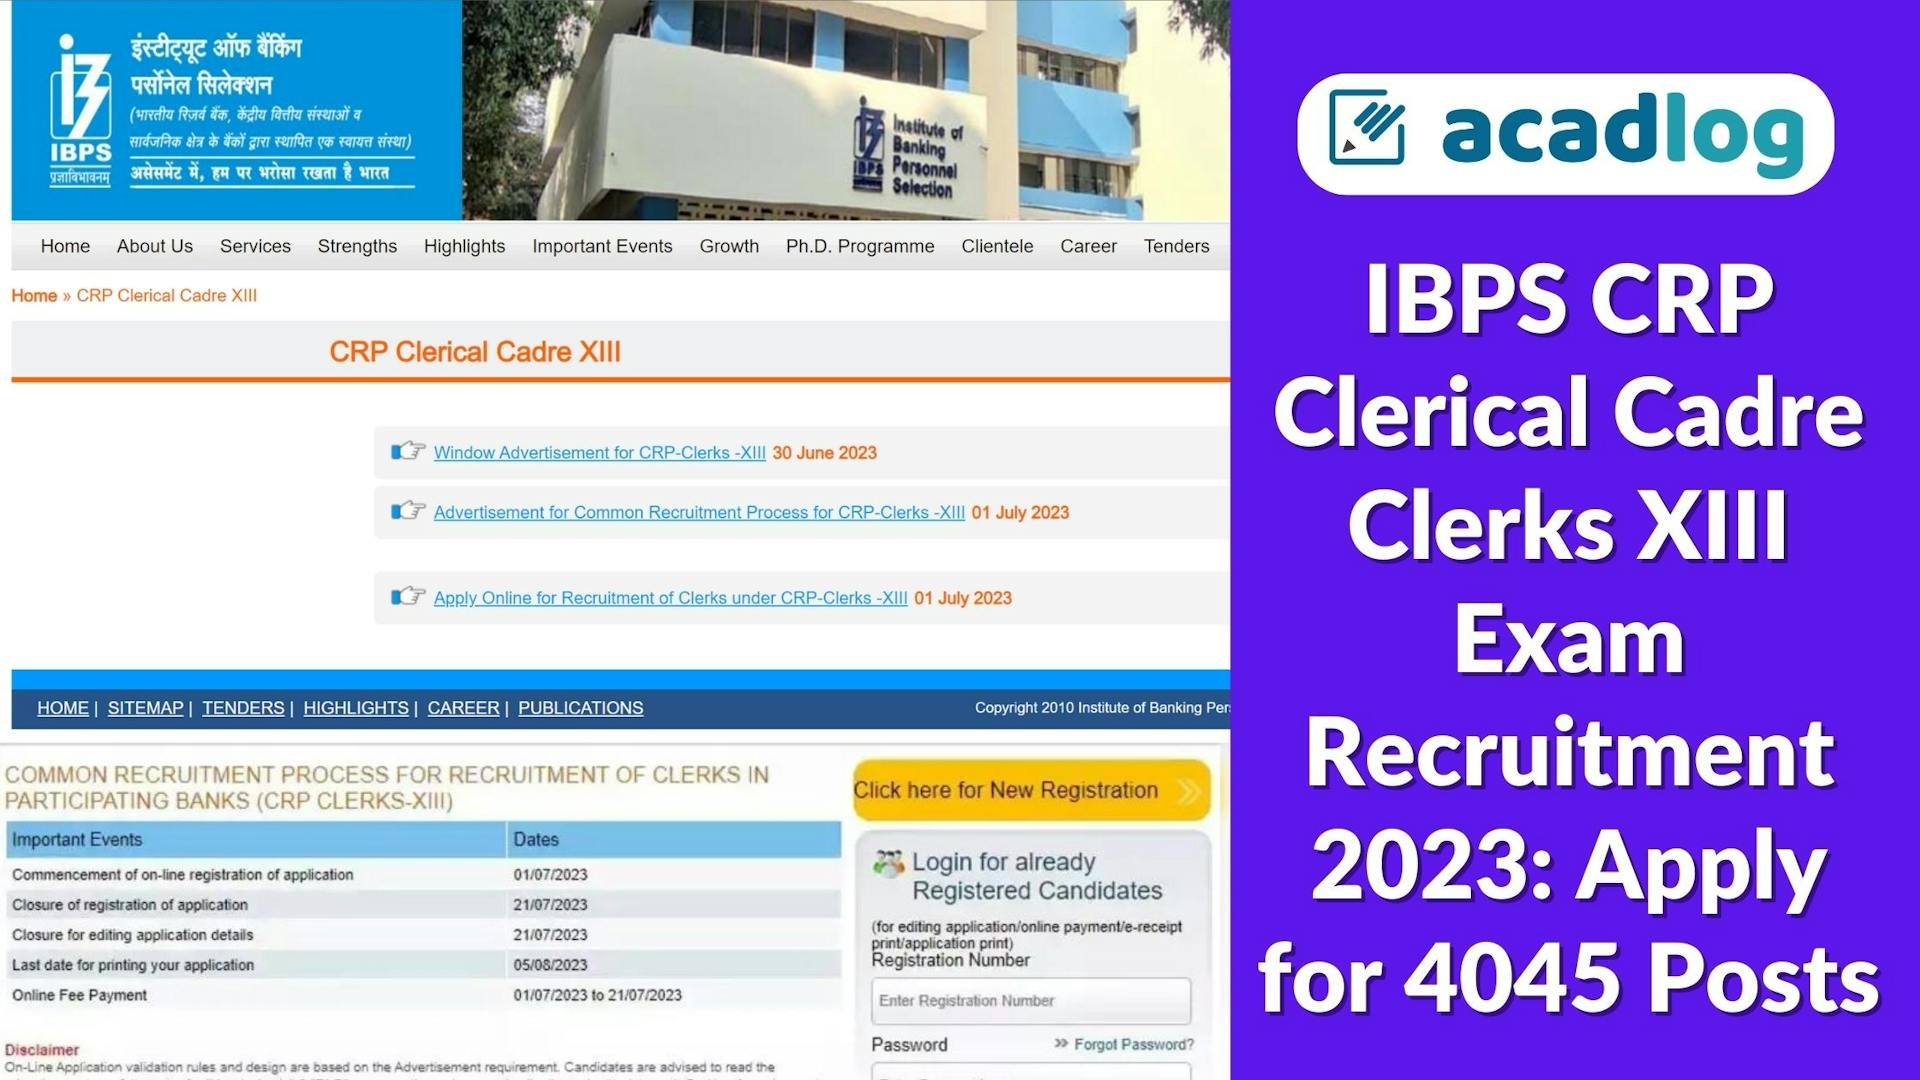 Acadlog: IBPS CRP Clerical Cadre Clerks XIII Exam Recruitment 2023: Apply for 4045 Posts